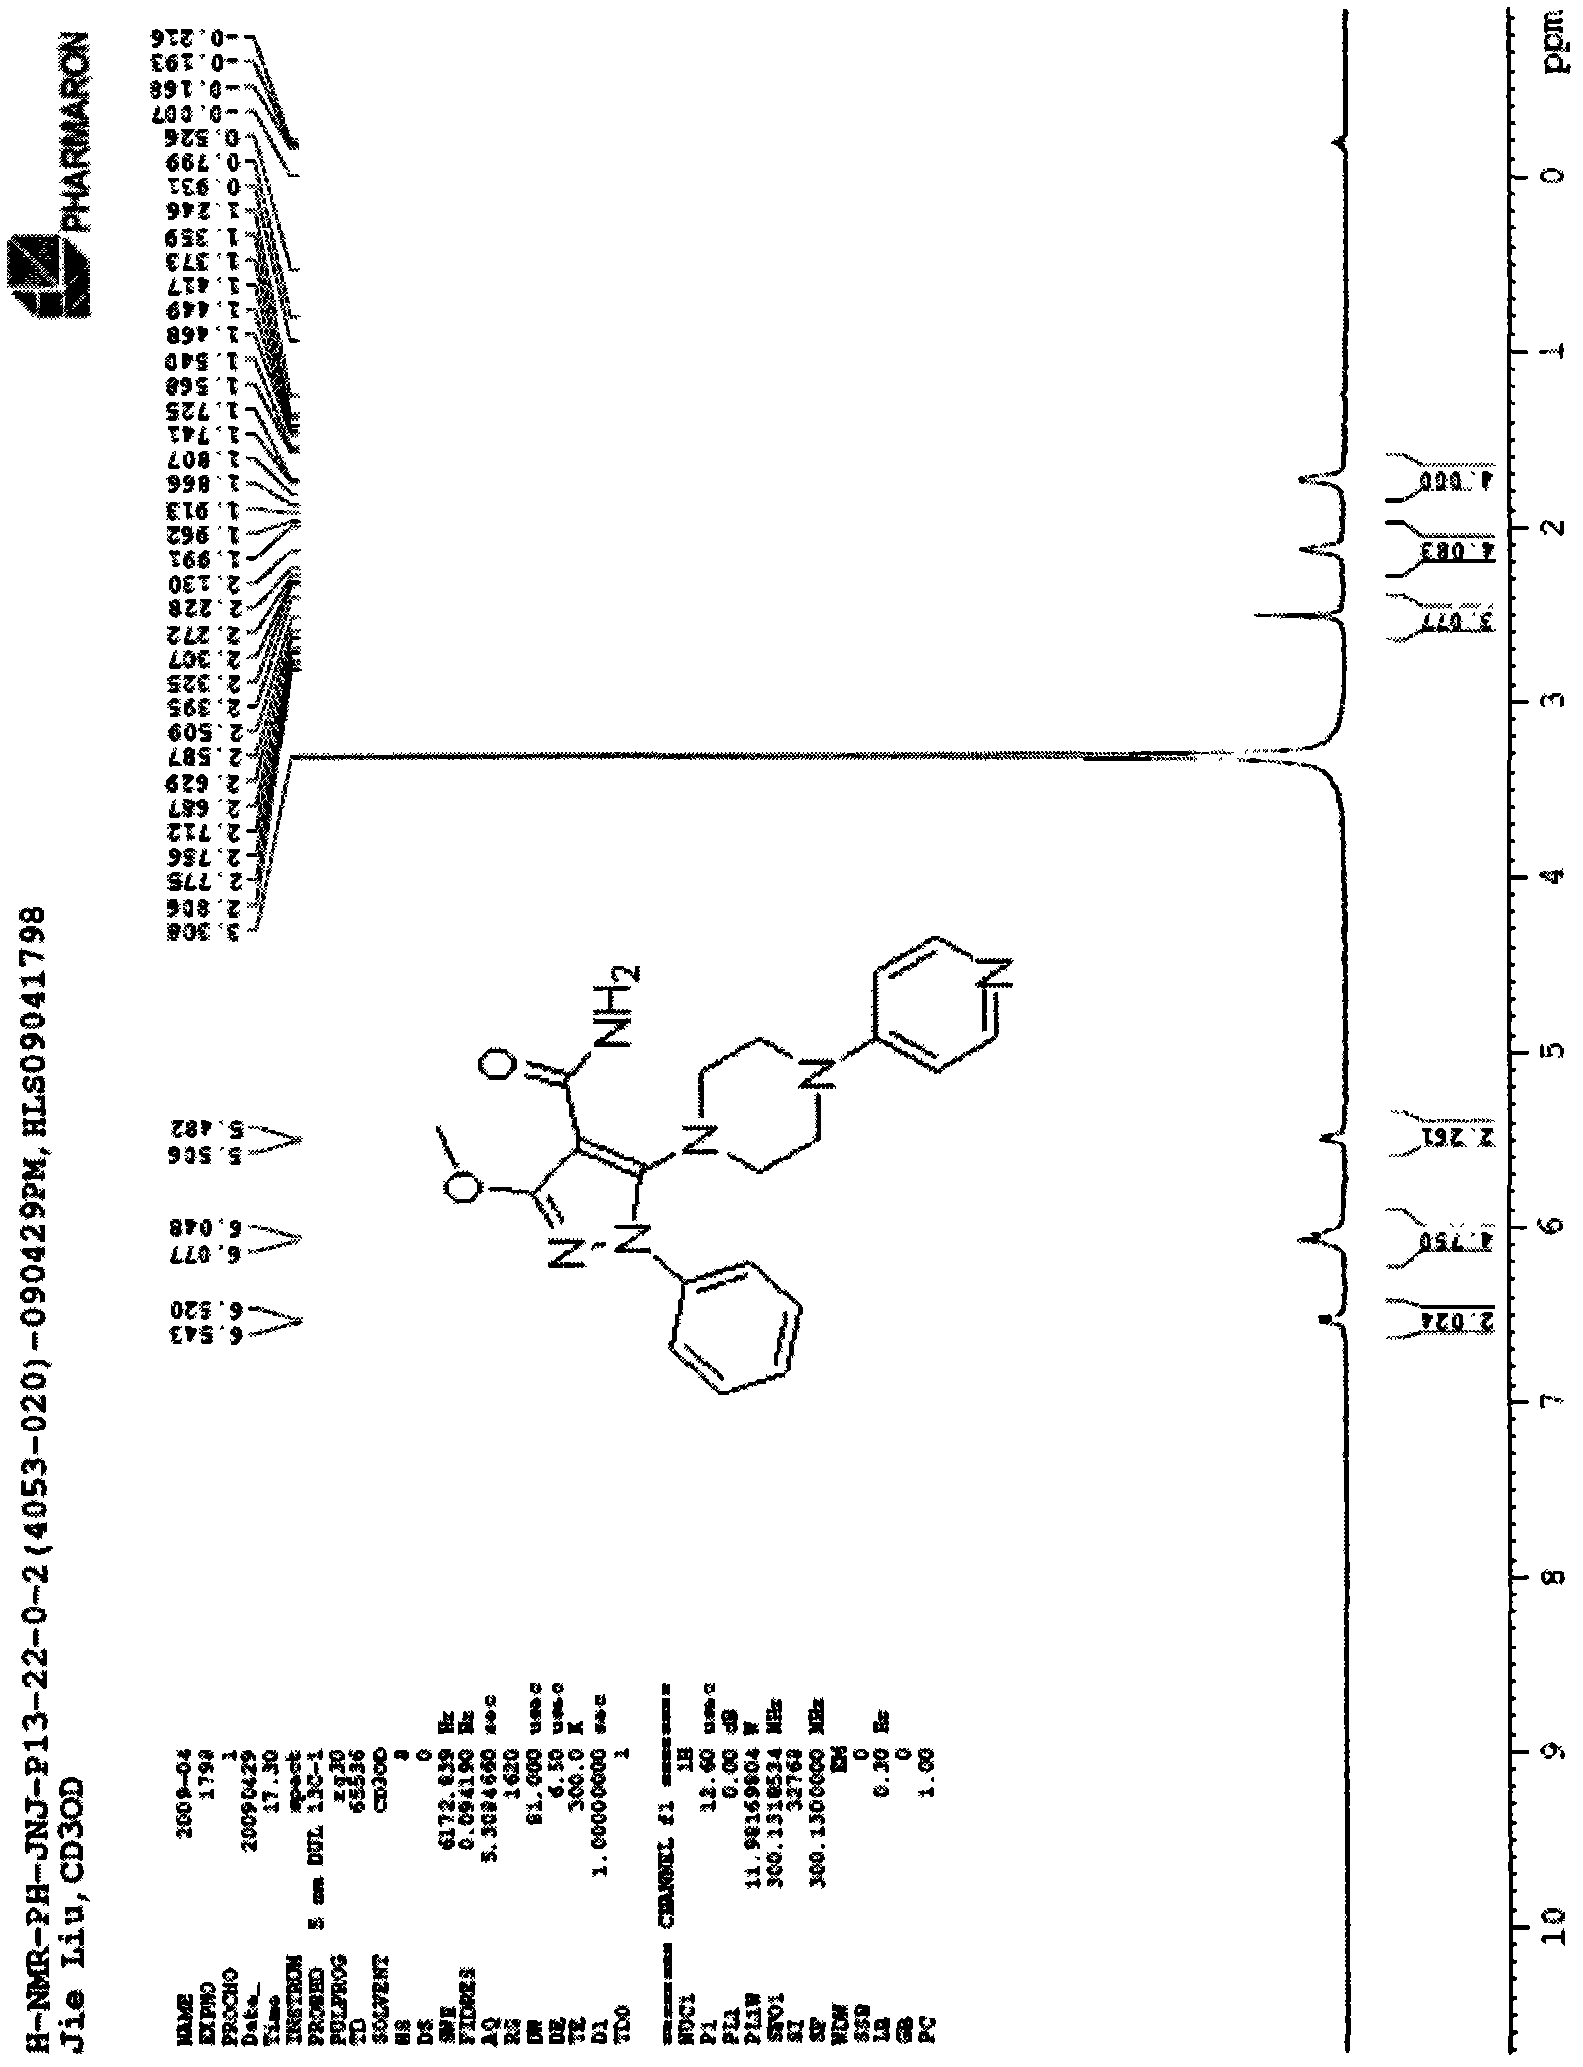 1-aryl-3-substituted-5-substituted amino-4-pyrazolecarboxamide compounds and their applications